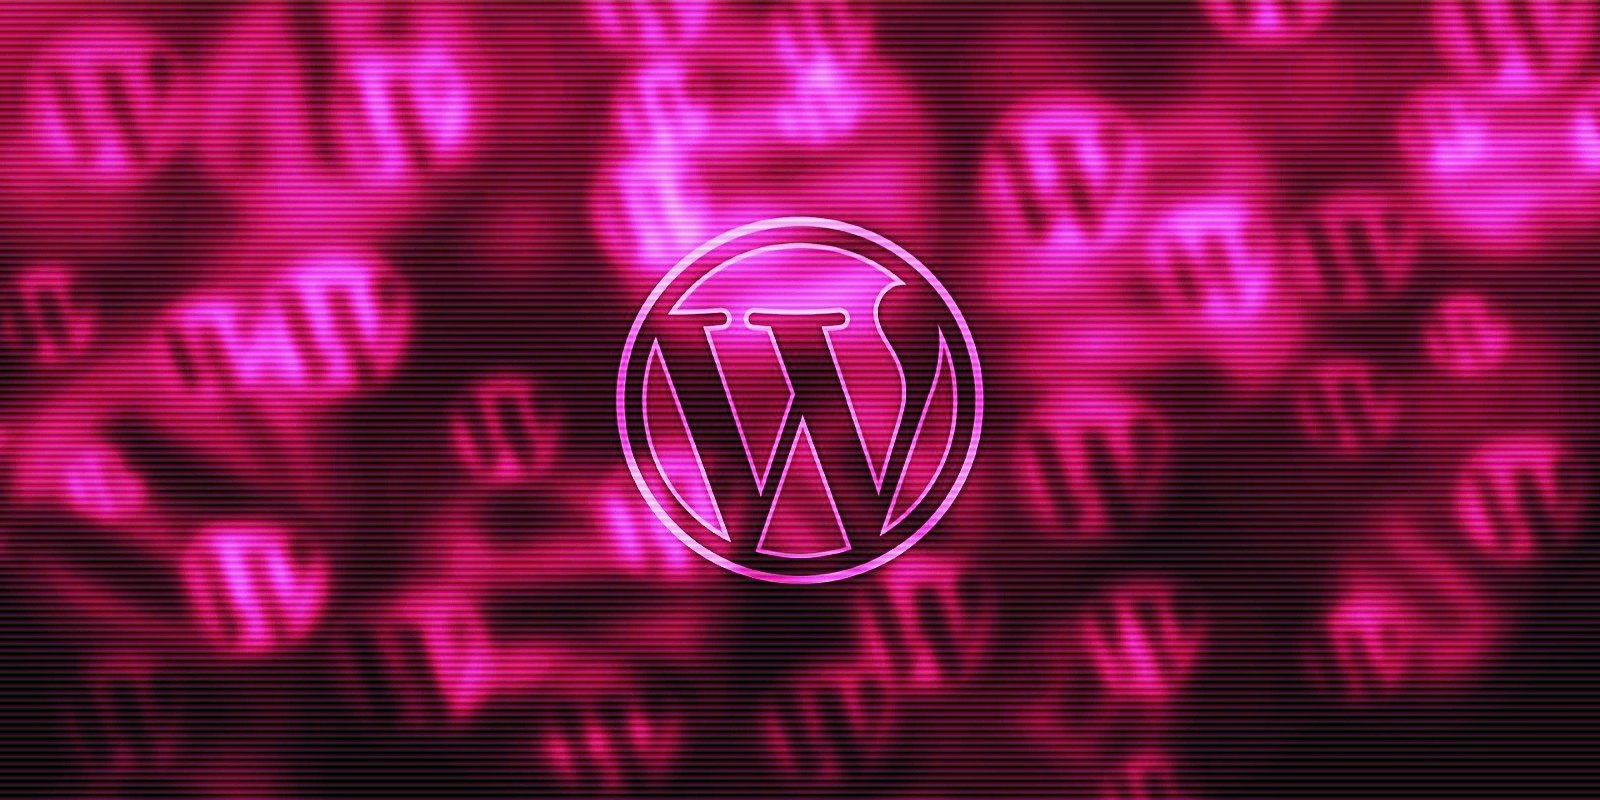 WordPress migration add-on flaw could lead to data breaches